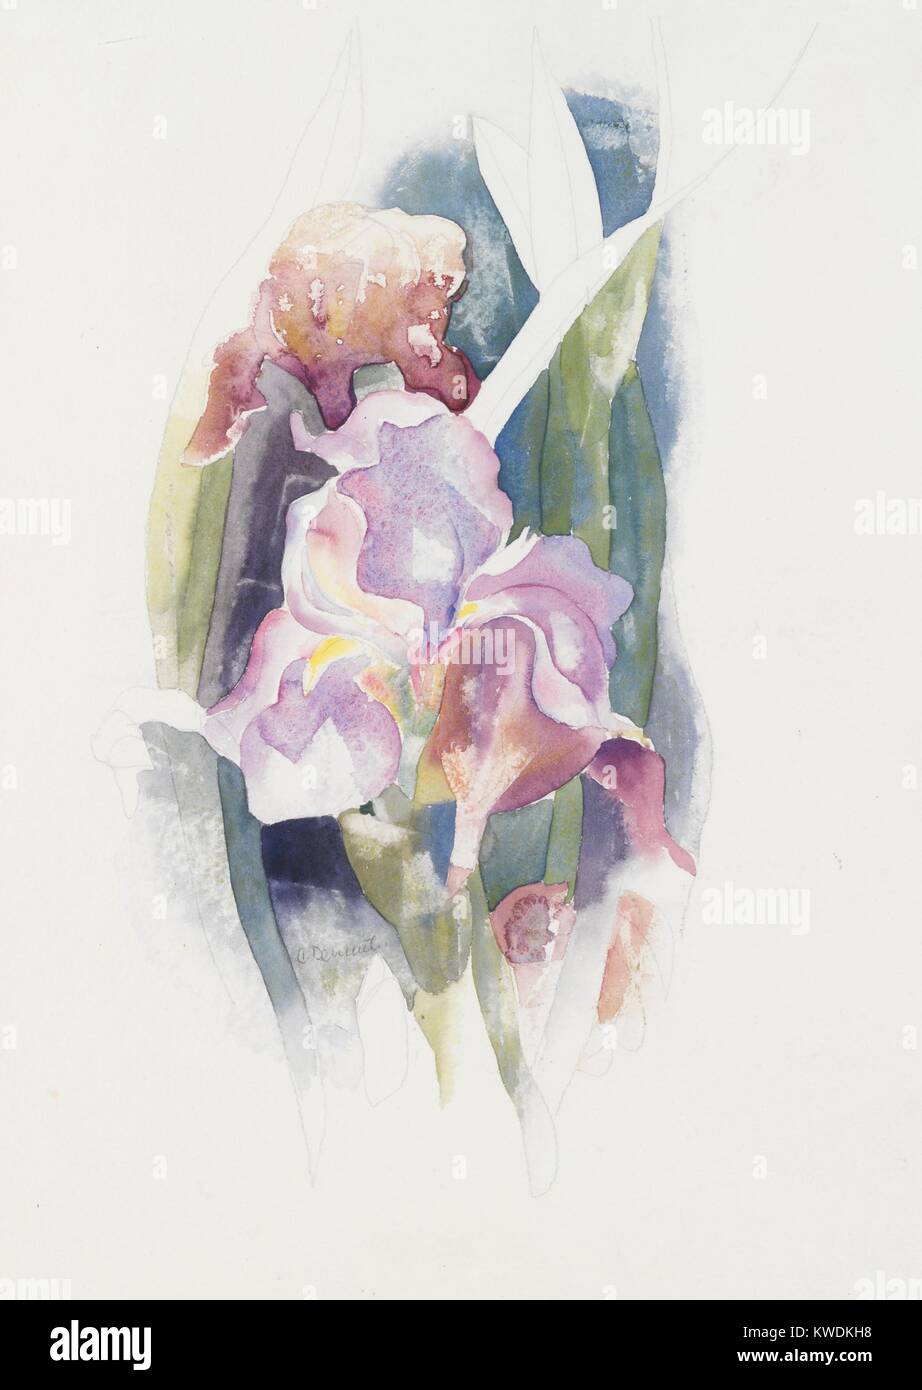 PURPLE IRIS, by Charles Demuth, c. 1920, American painting, watercolor, and graphite on cardboard. Demuths depicted the irises with naturalistic linear edges, and more subtle edges between brushed color within the luminous forms (BSLOC 2017 7 95) Stock Photo